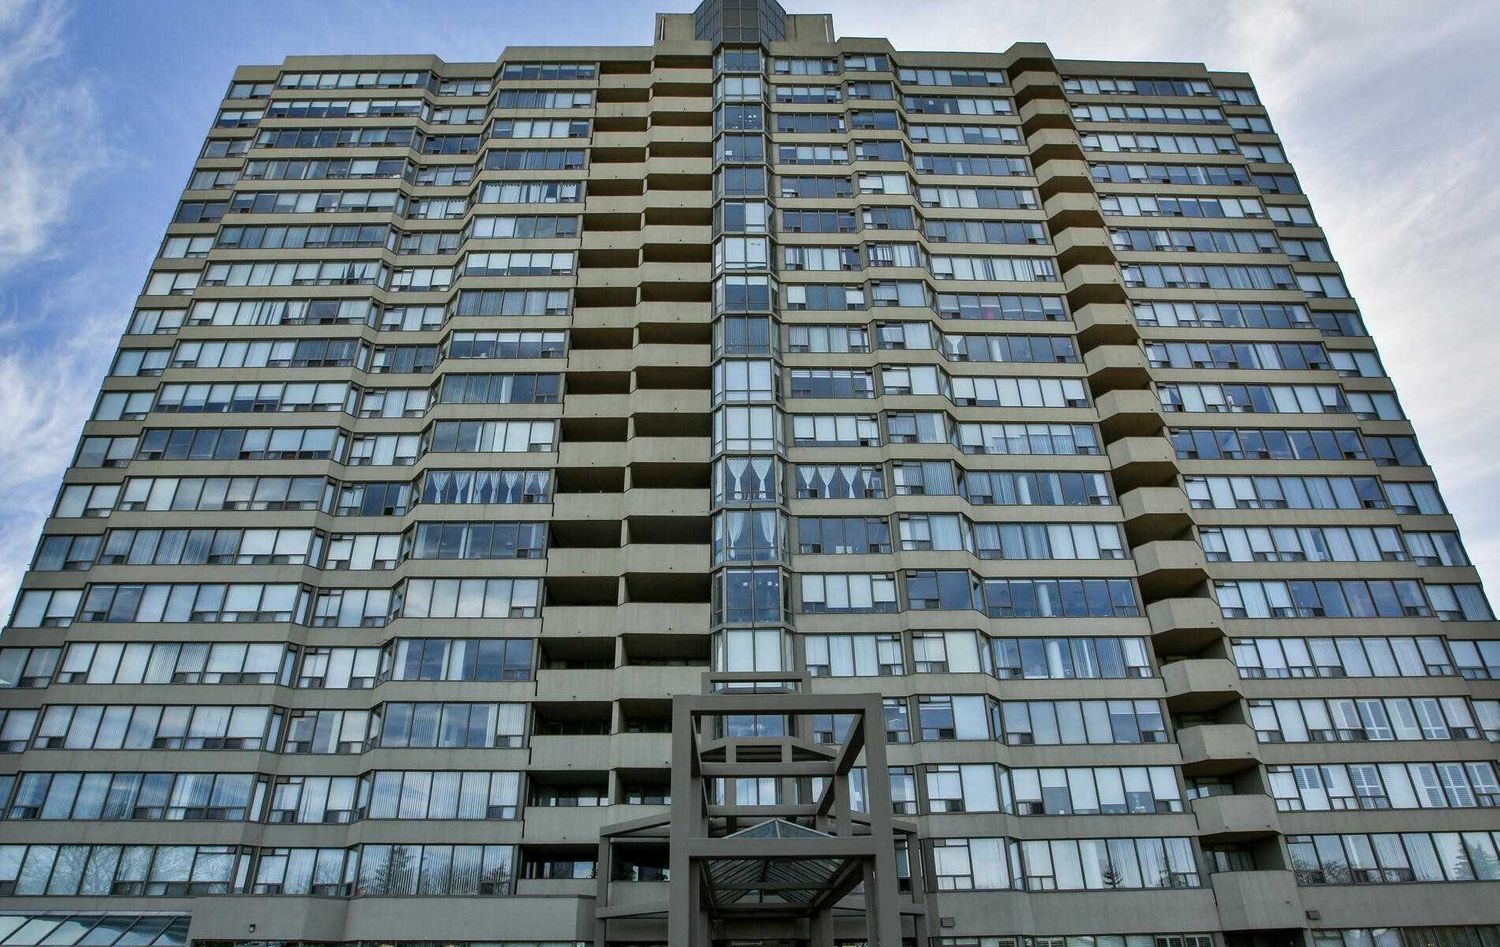 700 Constellation Drive. Constellation Place Condos is located in  Mississauga, Toronto - image #2 of 2